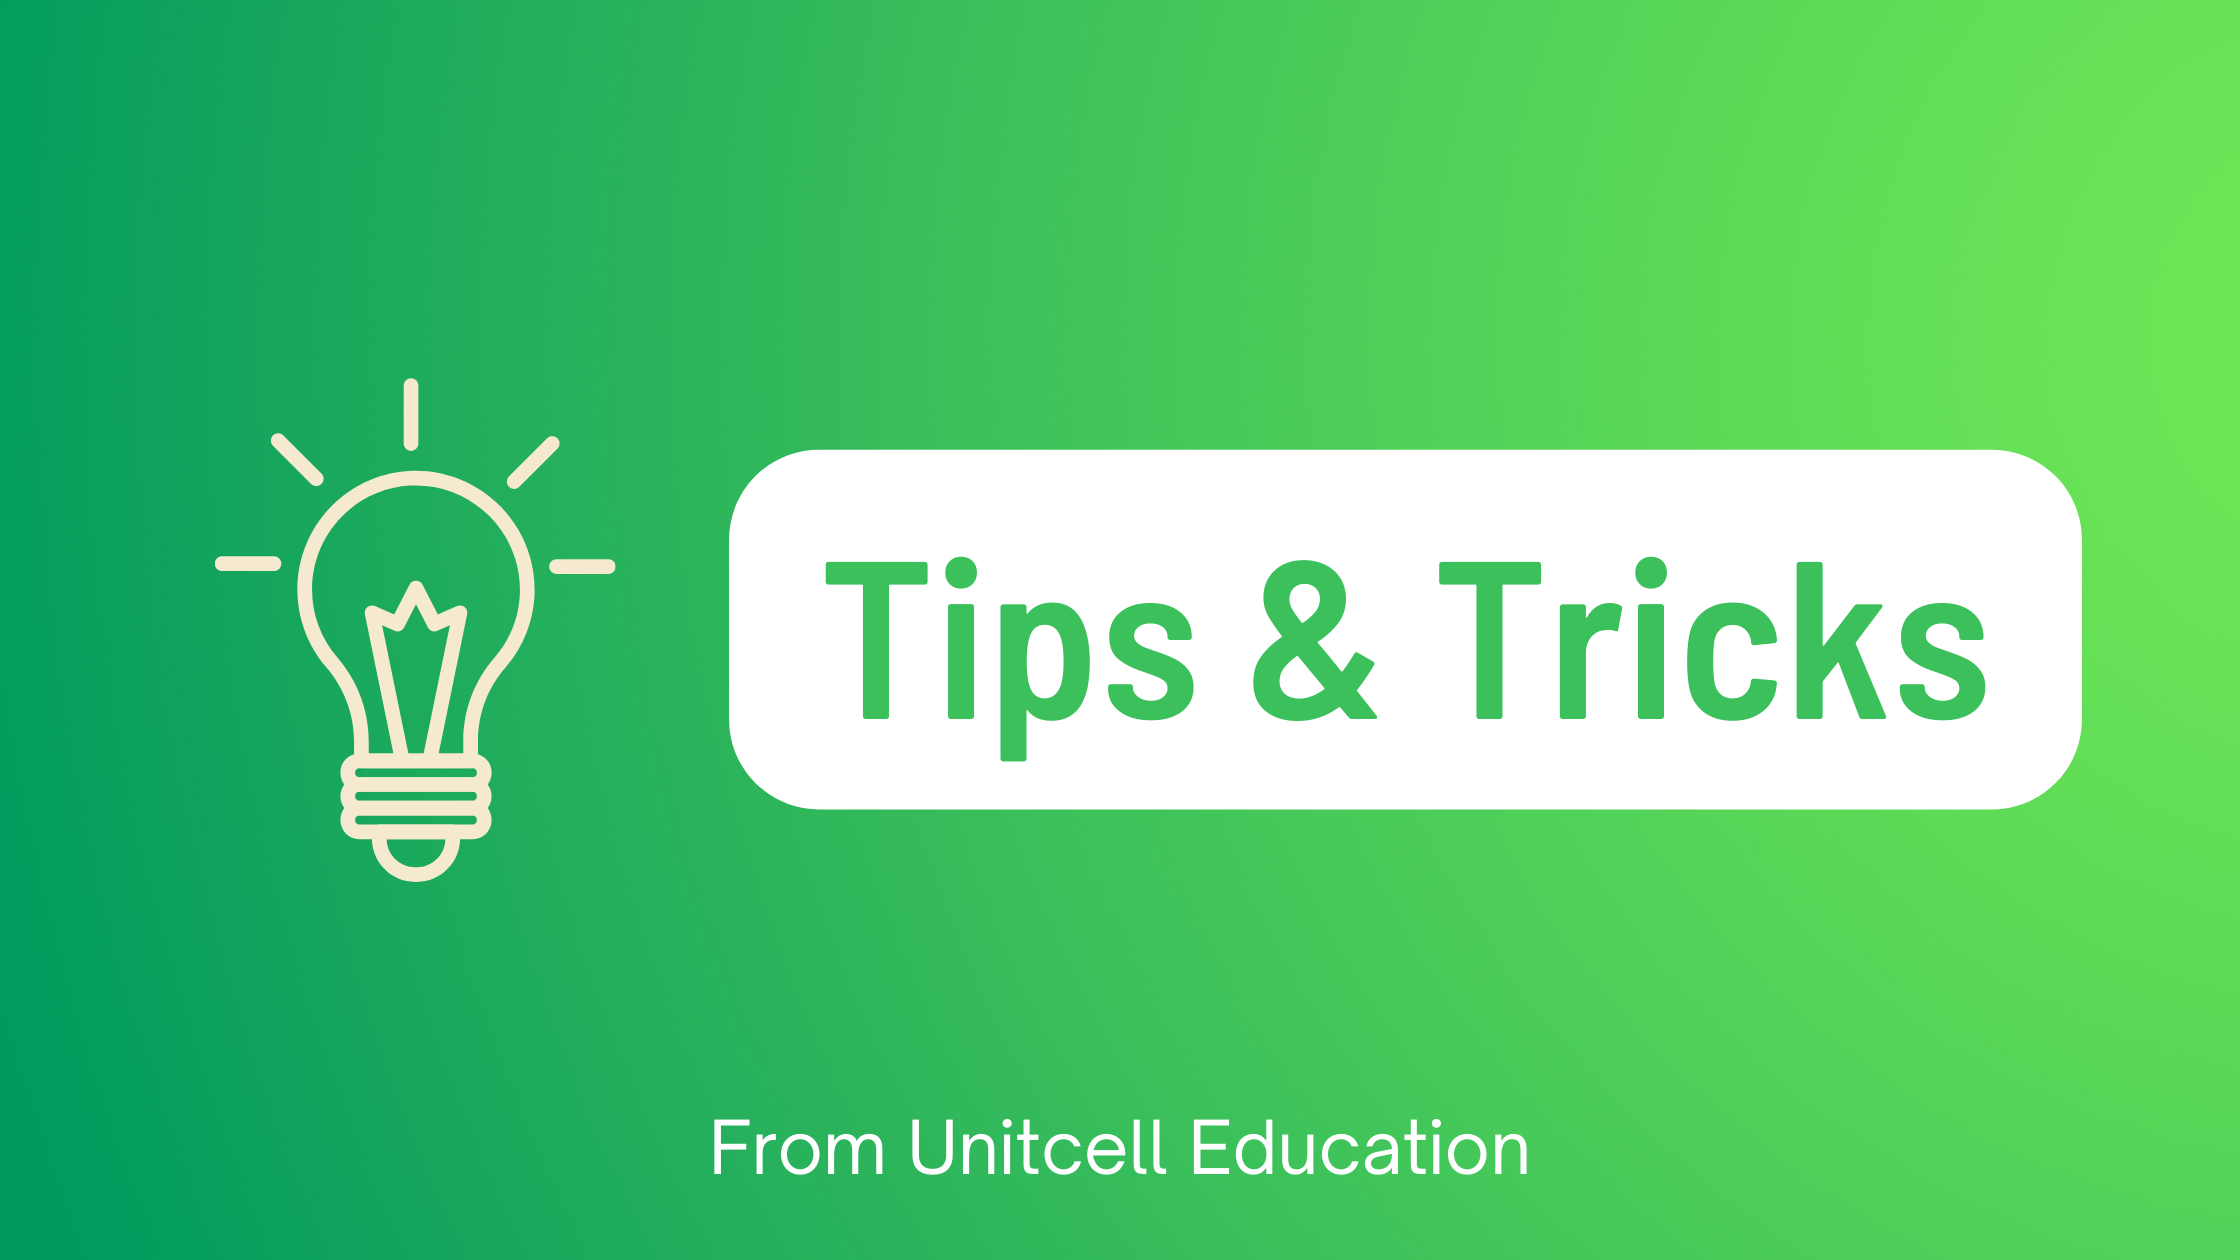 Tips & tricks from unitcell education